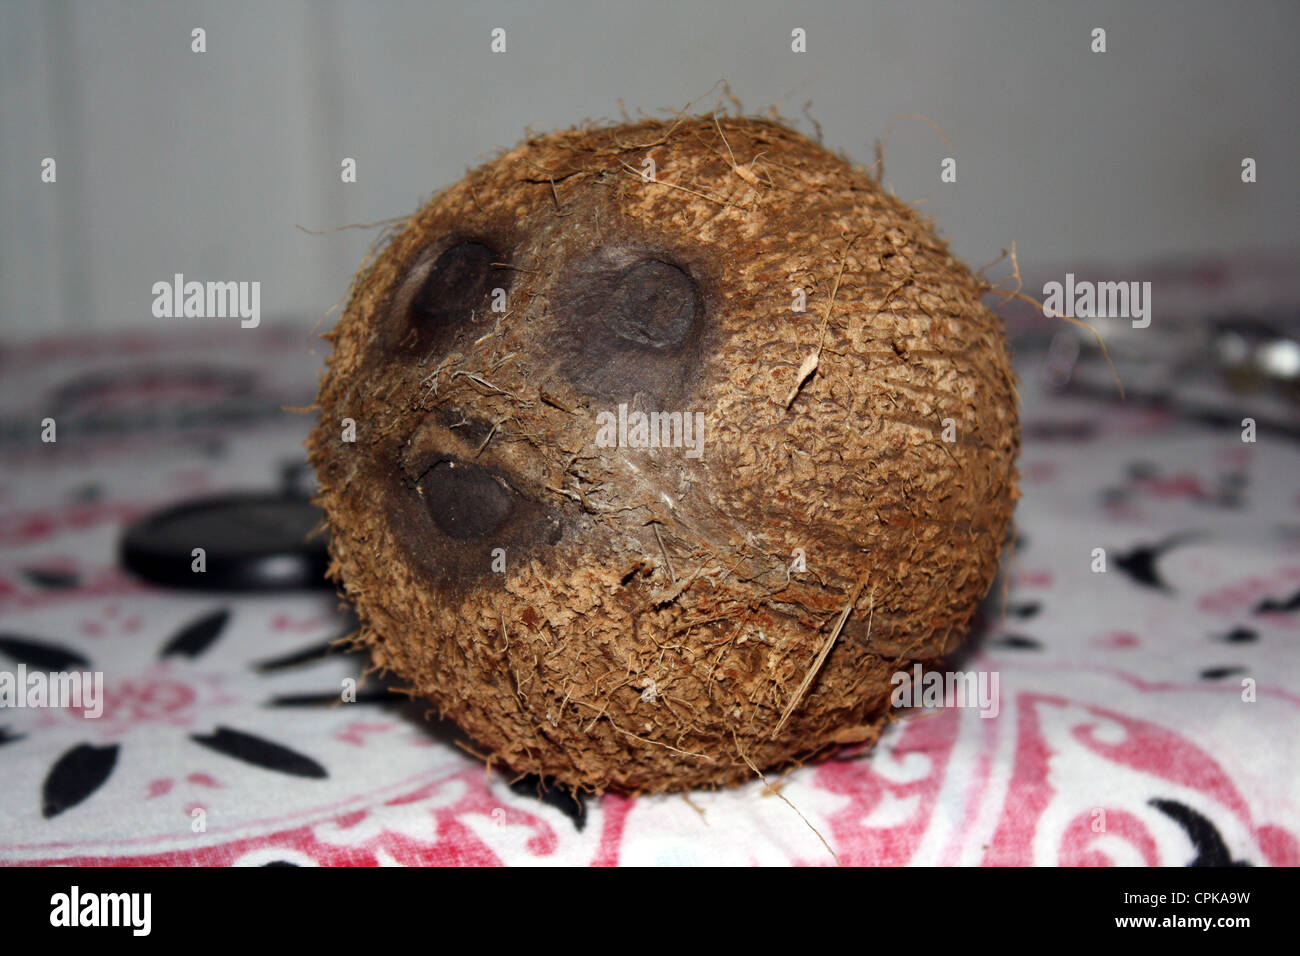 Coconut having eyes and mouth found in Kerala, India Stock Photo